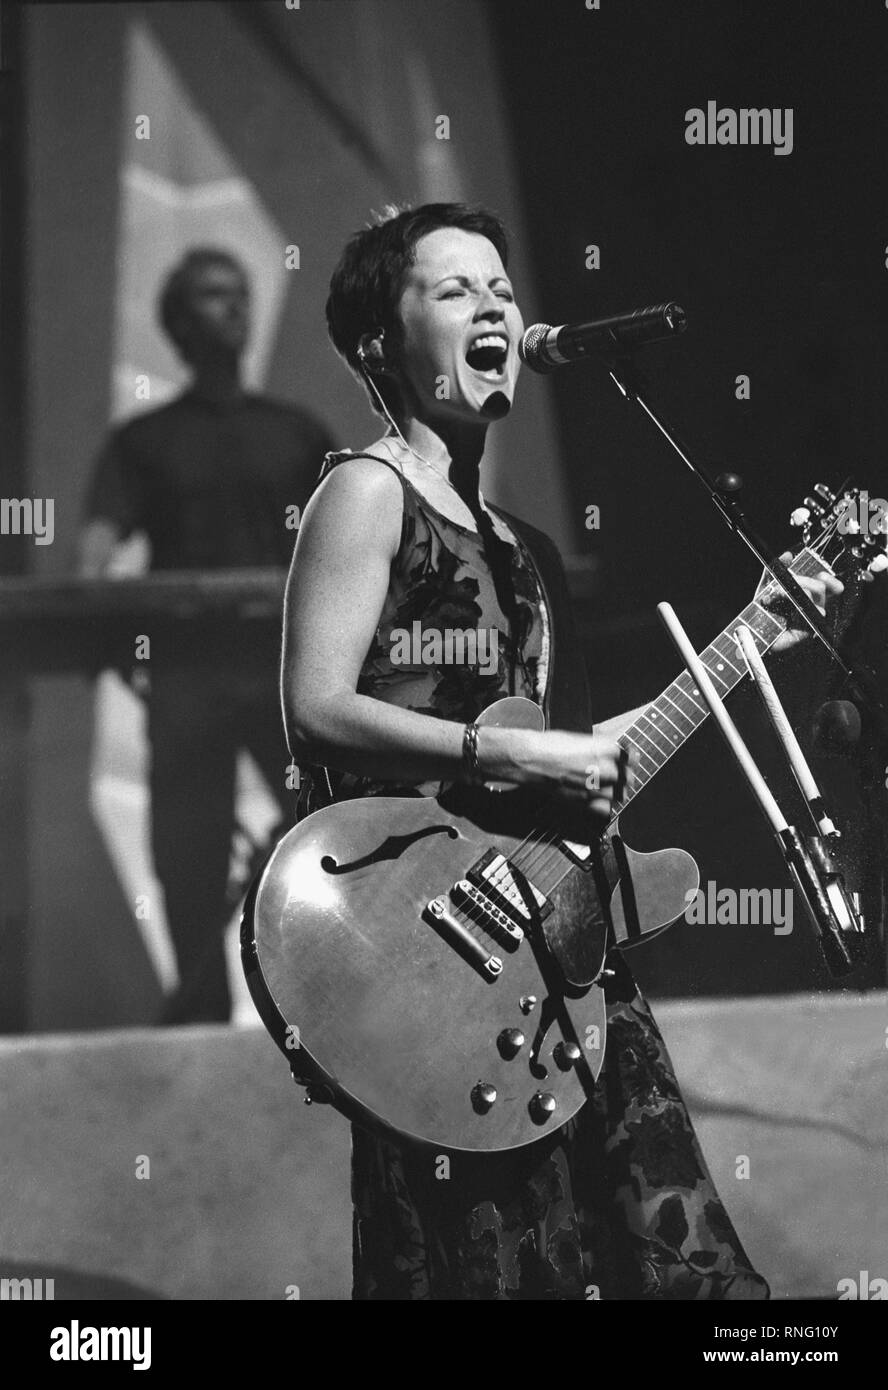 Cranberries Vocalist Dolores O Riordan Is Shown Performing On Stage During A Live Concert Appearance Stock Photo Alamy